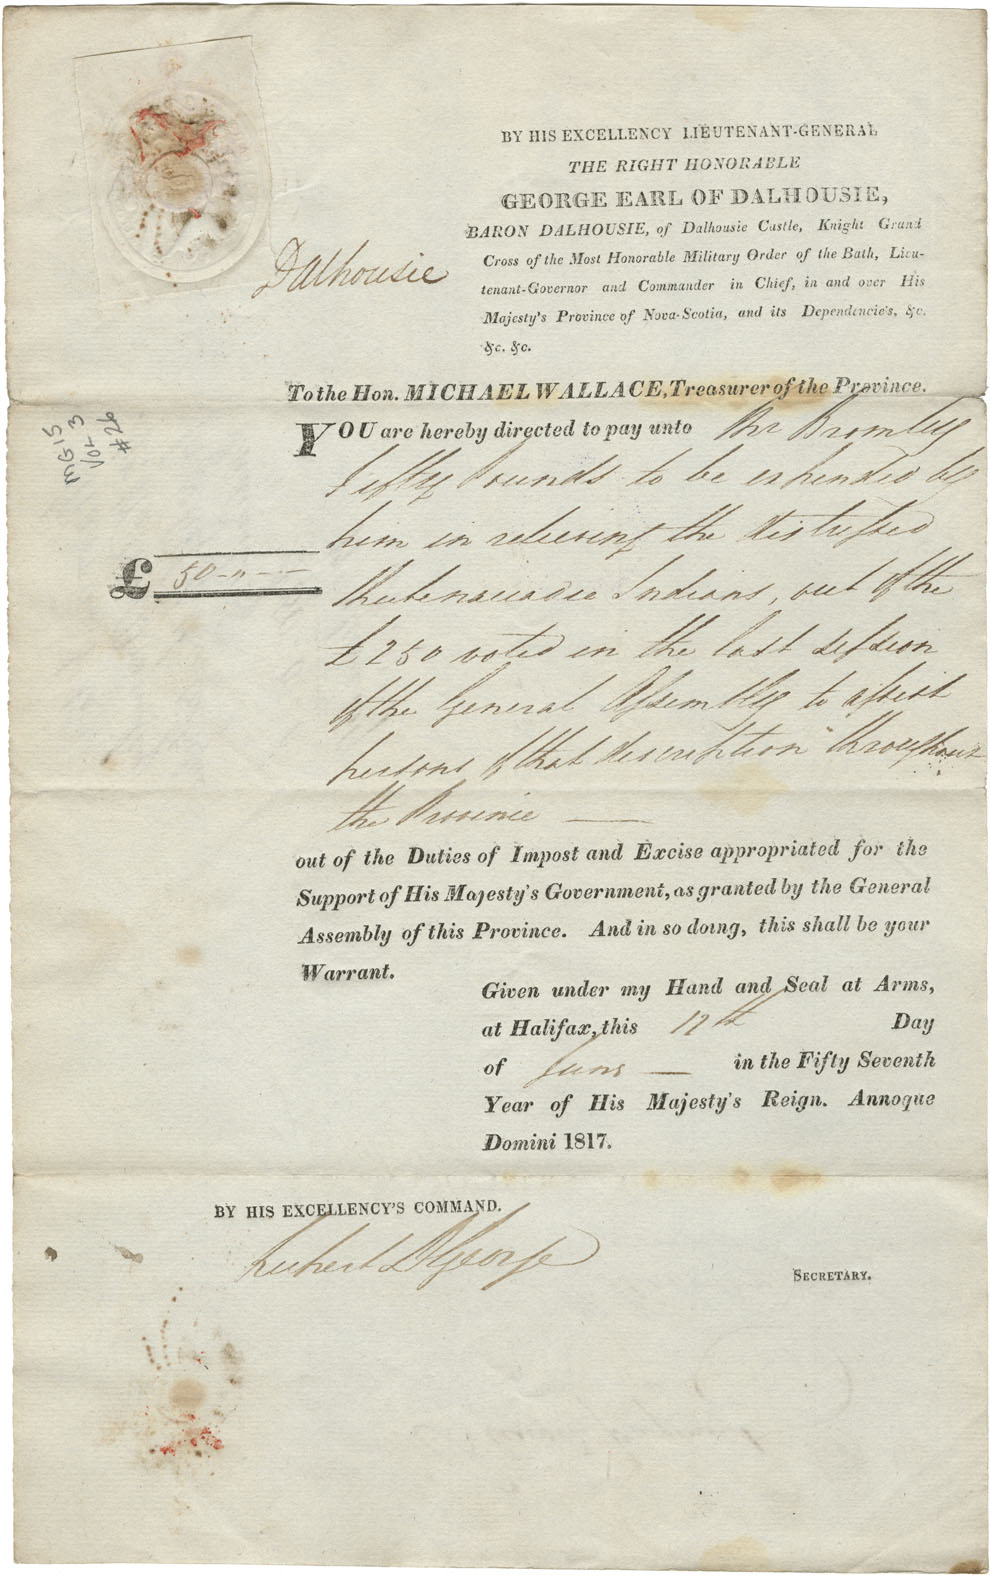 Earl of Dalhousie's order to Michael Wallace, Treasurer, to give £50 to Walter Bromley for the relief of the Shubenacadie Mi'kmaq.